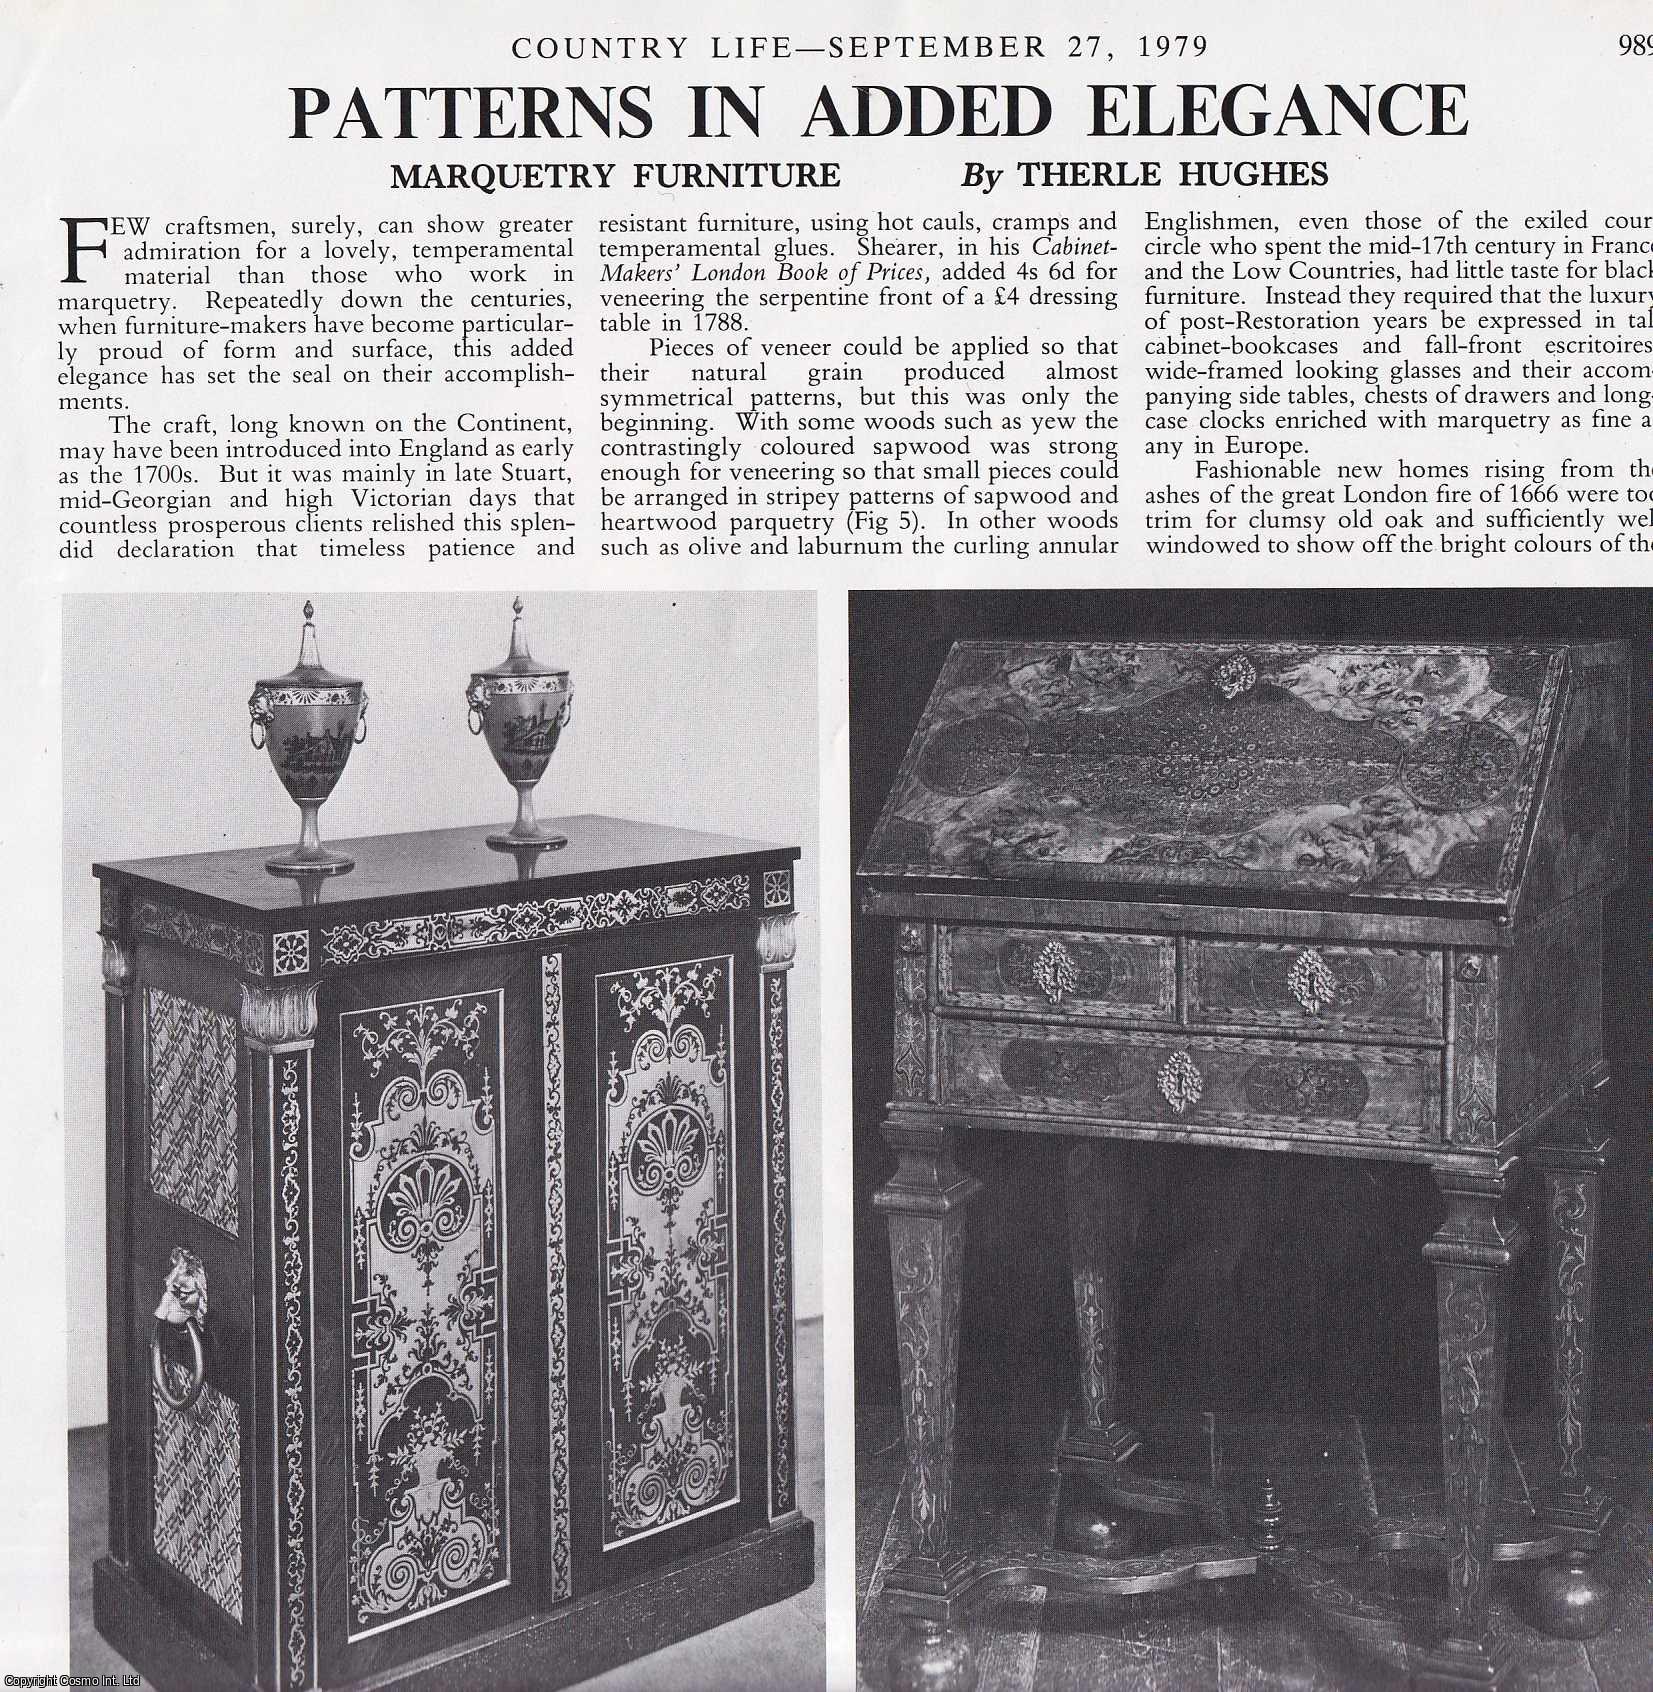 Therle Hughes - Marquetry Furniture. Several pictures and accompanying text, removed from an original issue of Country Life Magazine, 1979.